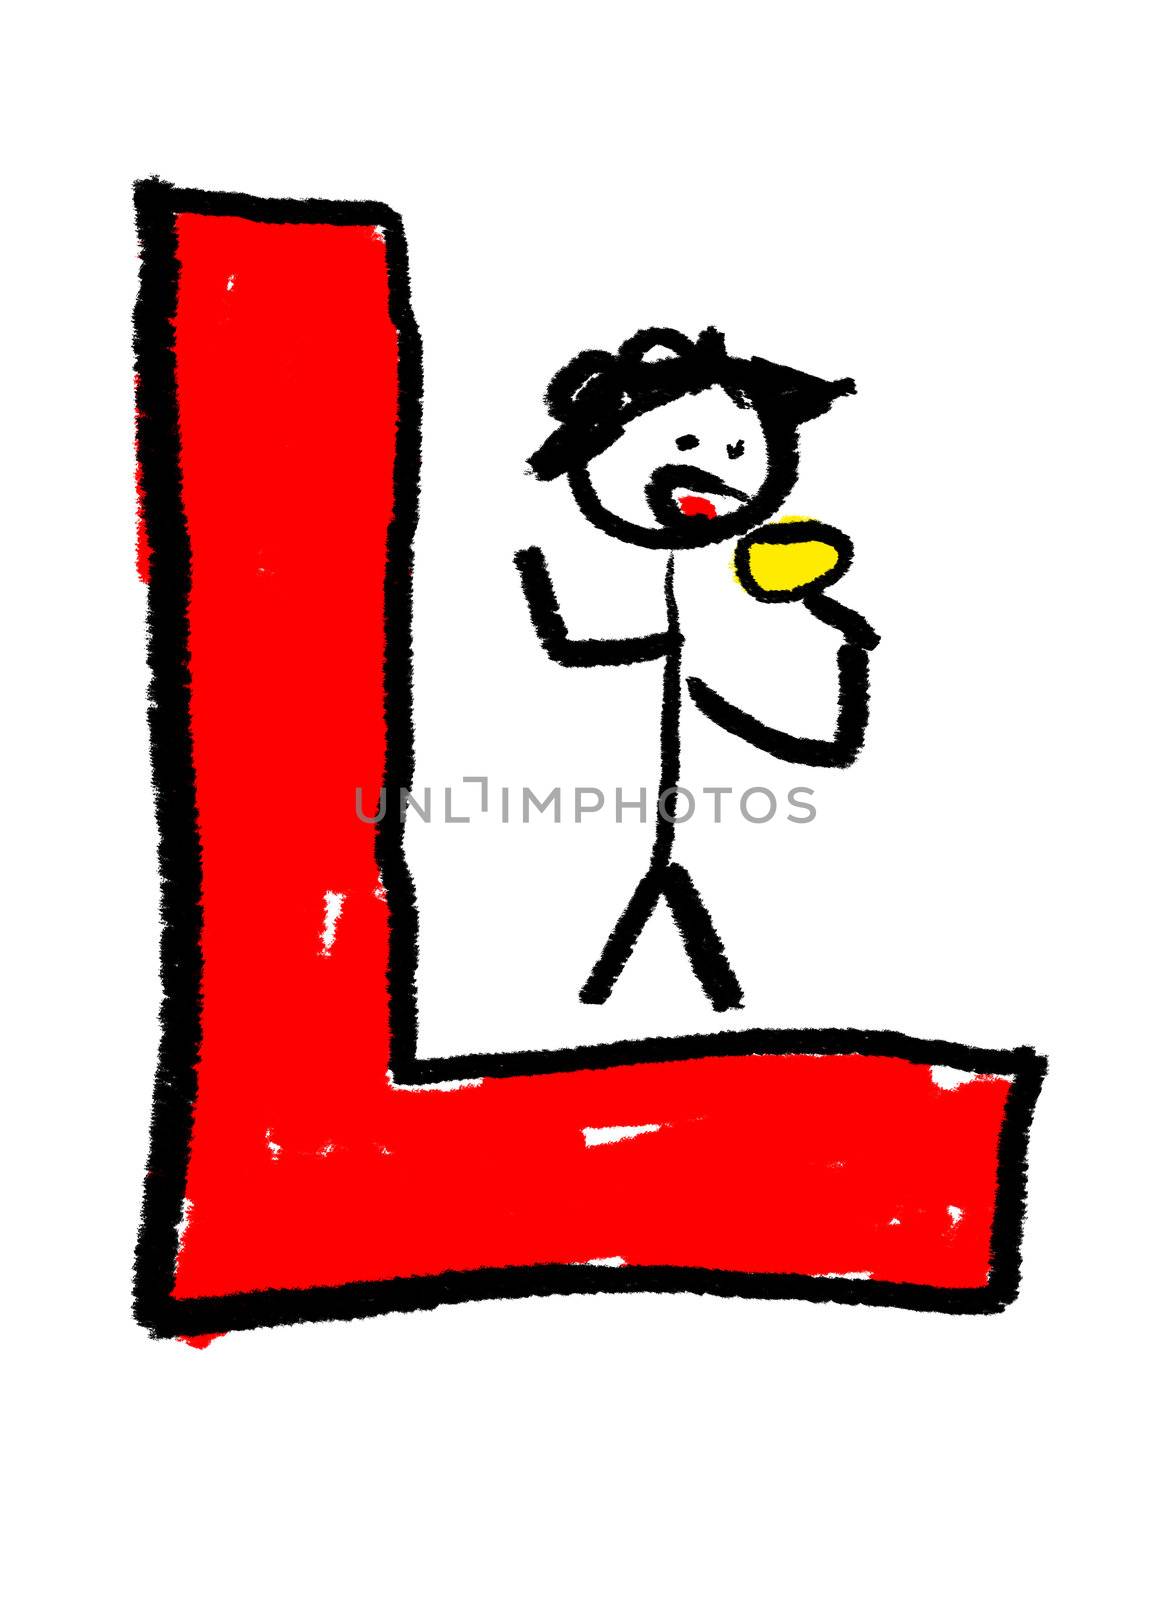 A childlike drawing of the letter L, with a boy licking a lollypop